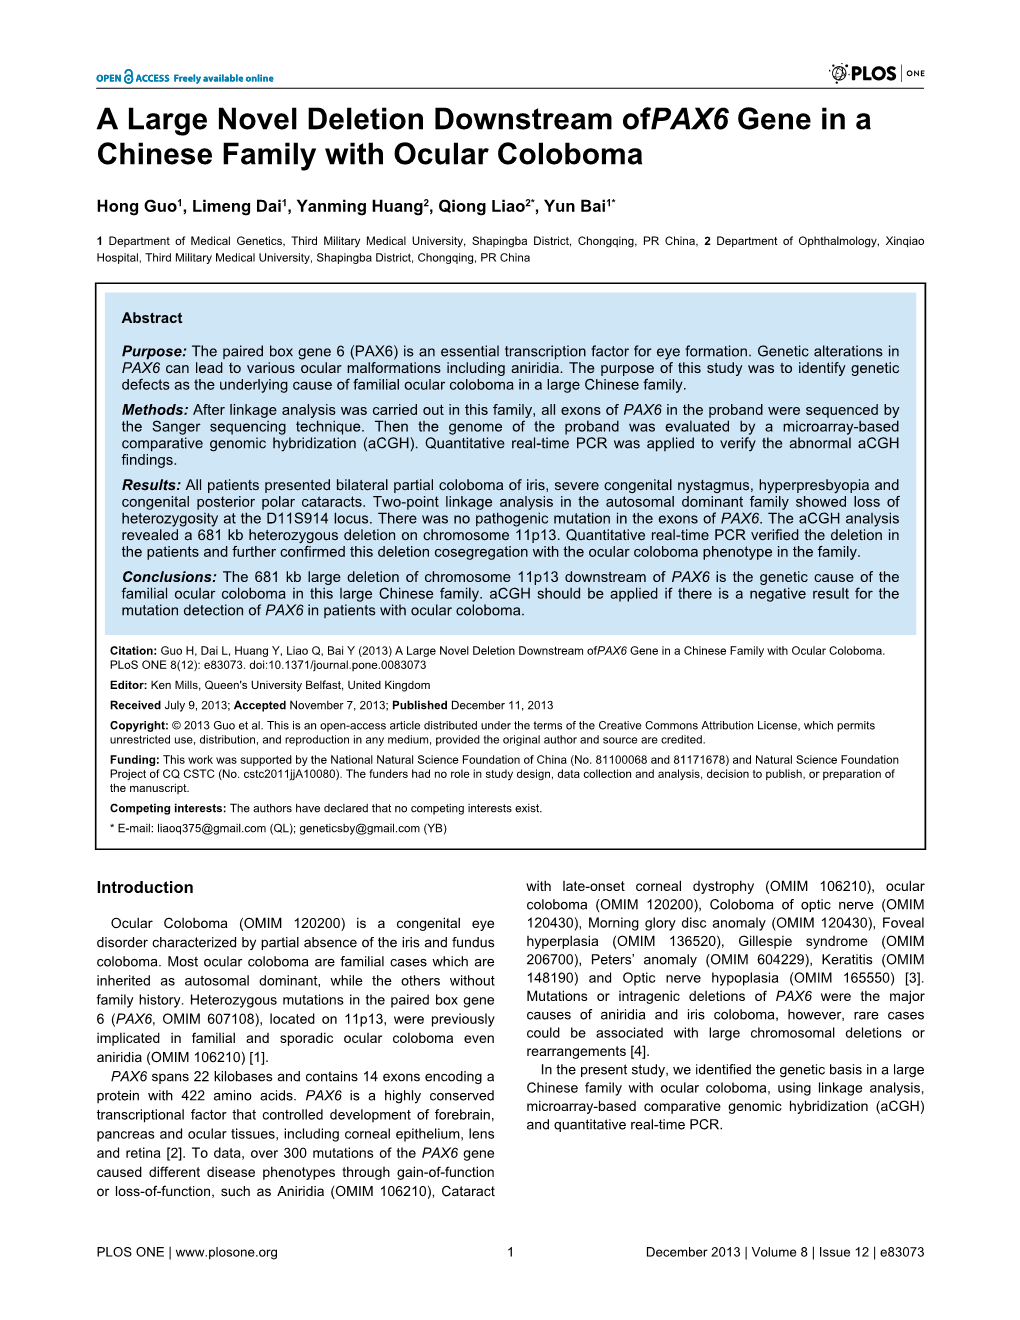 A Large Novel Deletion Downstream Ofpax6 Gene in a Chinese Family with Ocular Coloboma